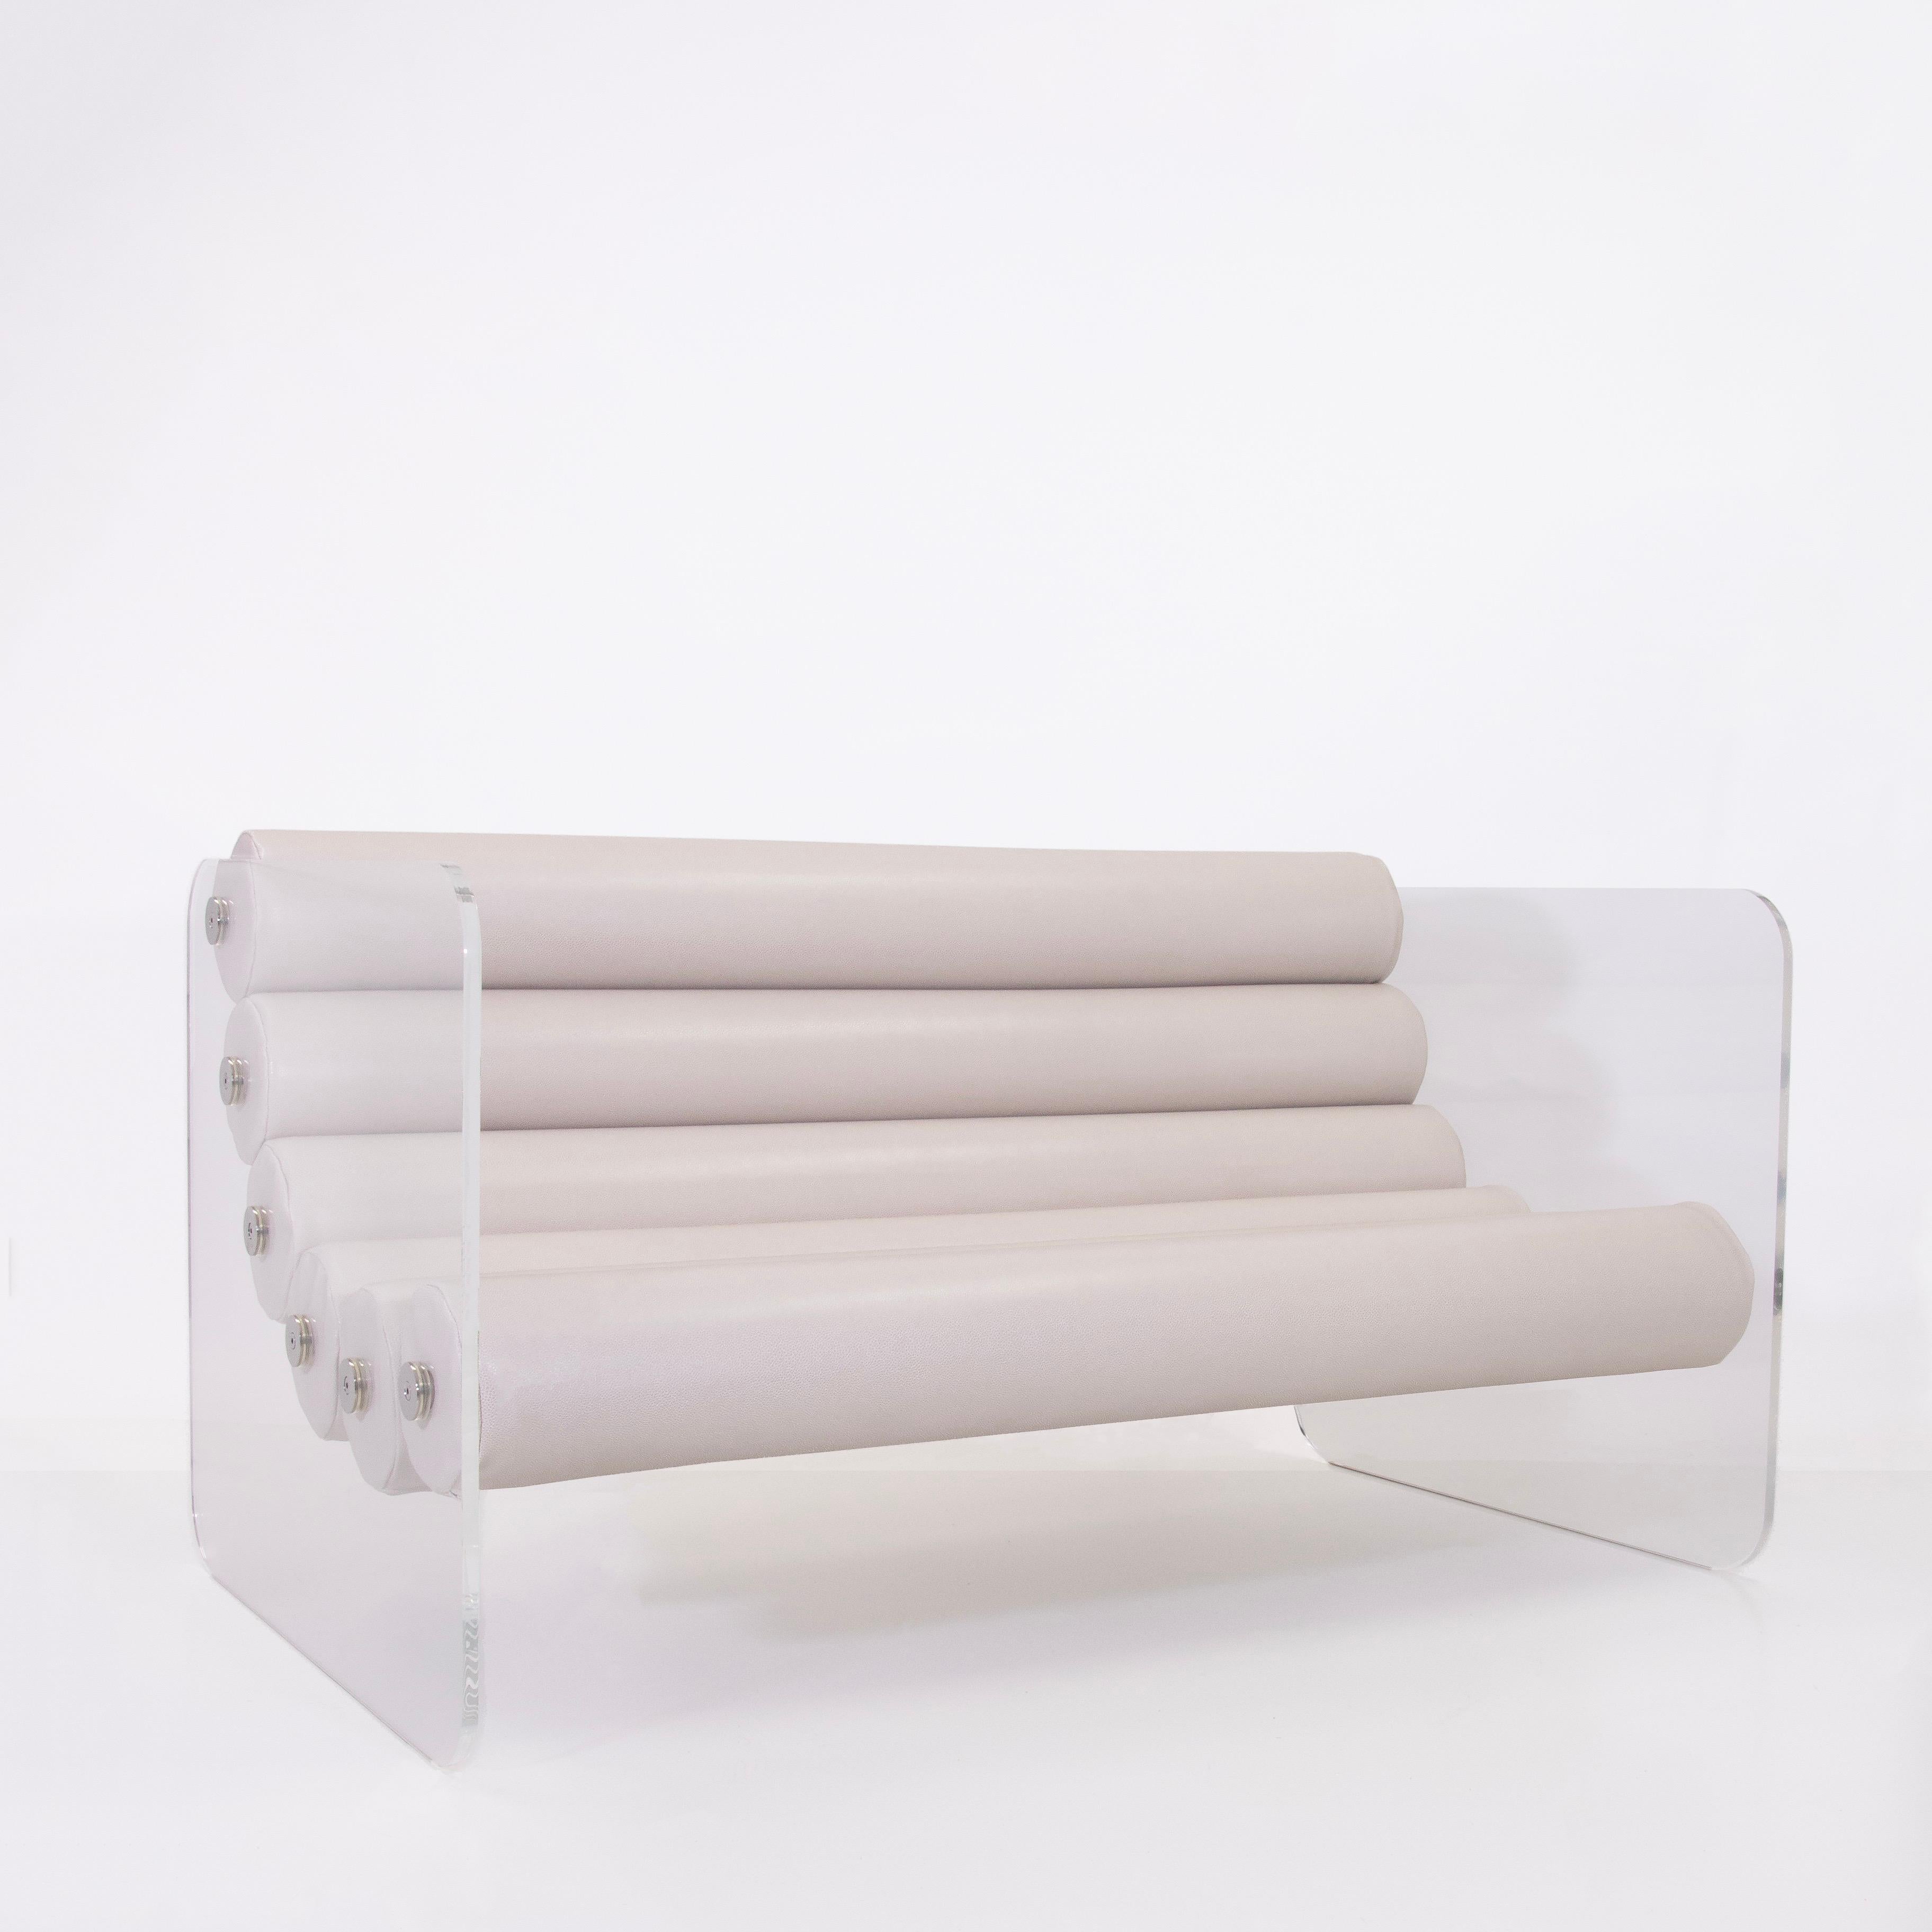 Stainless Steel Design sofa Mw02, made in France, designed by Olivier Santini For Sale